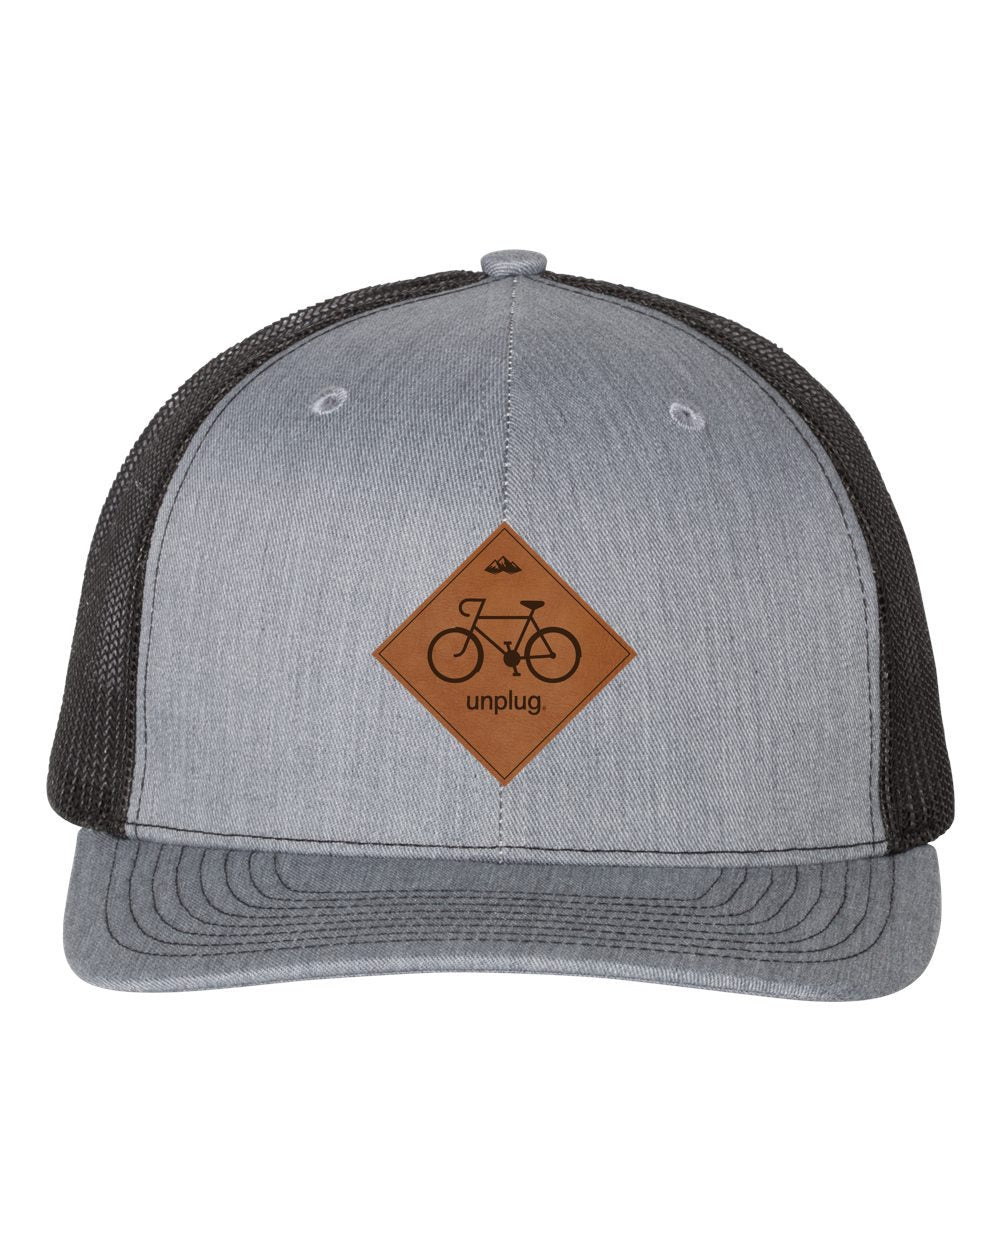 Road Bike Leather Patch Hat - The Wanderheart Project